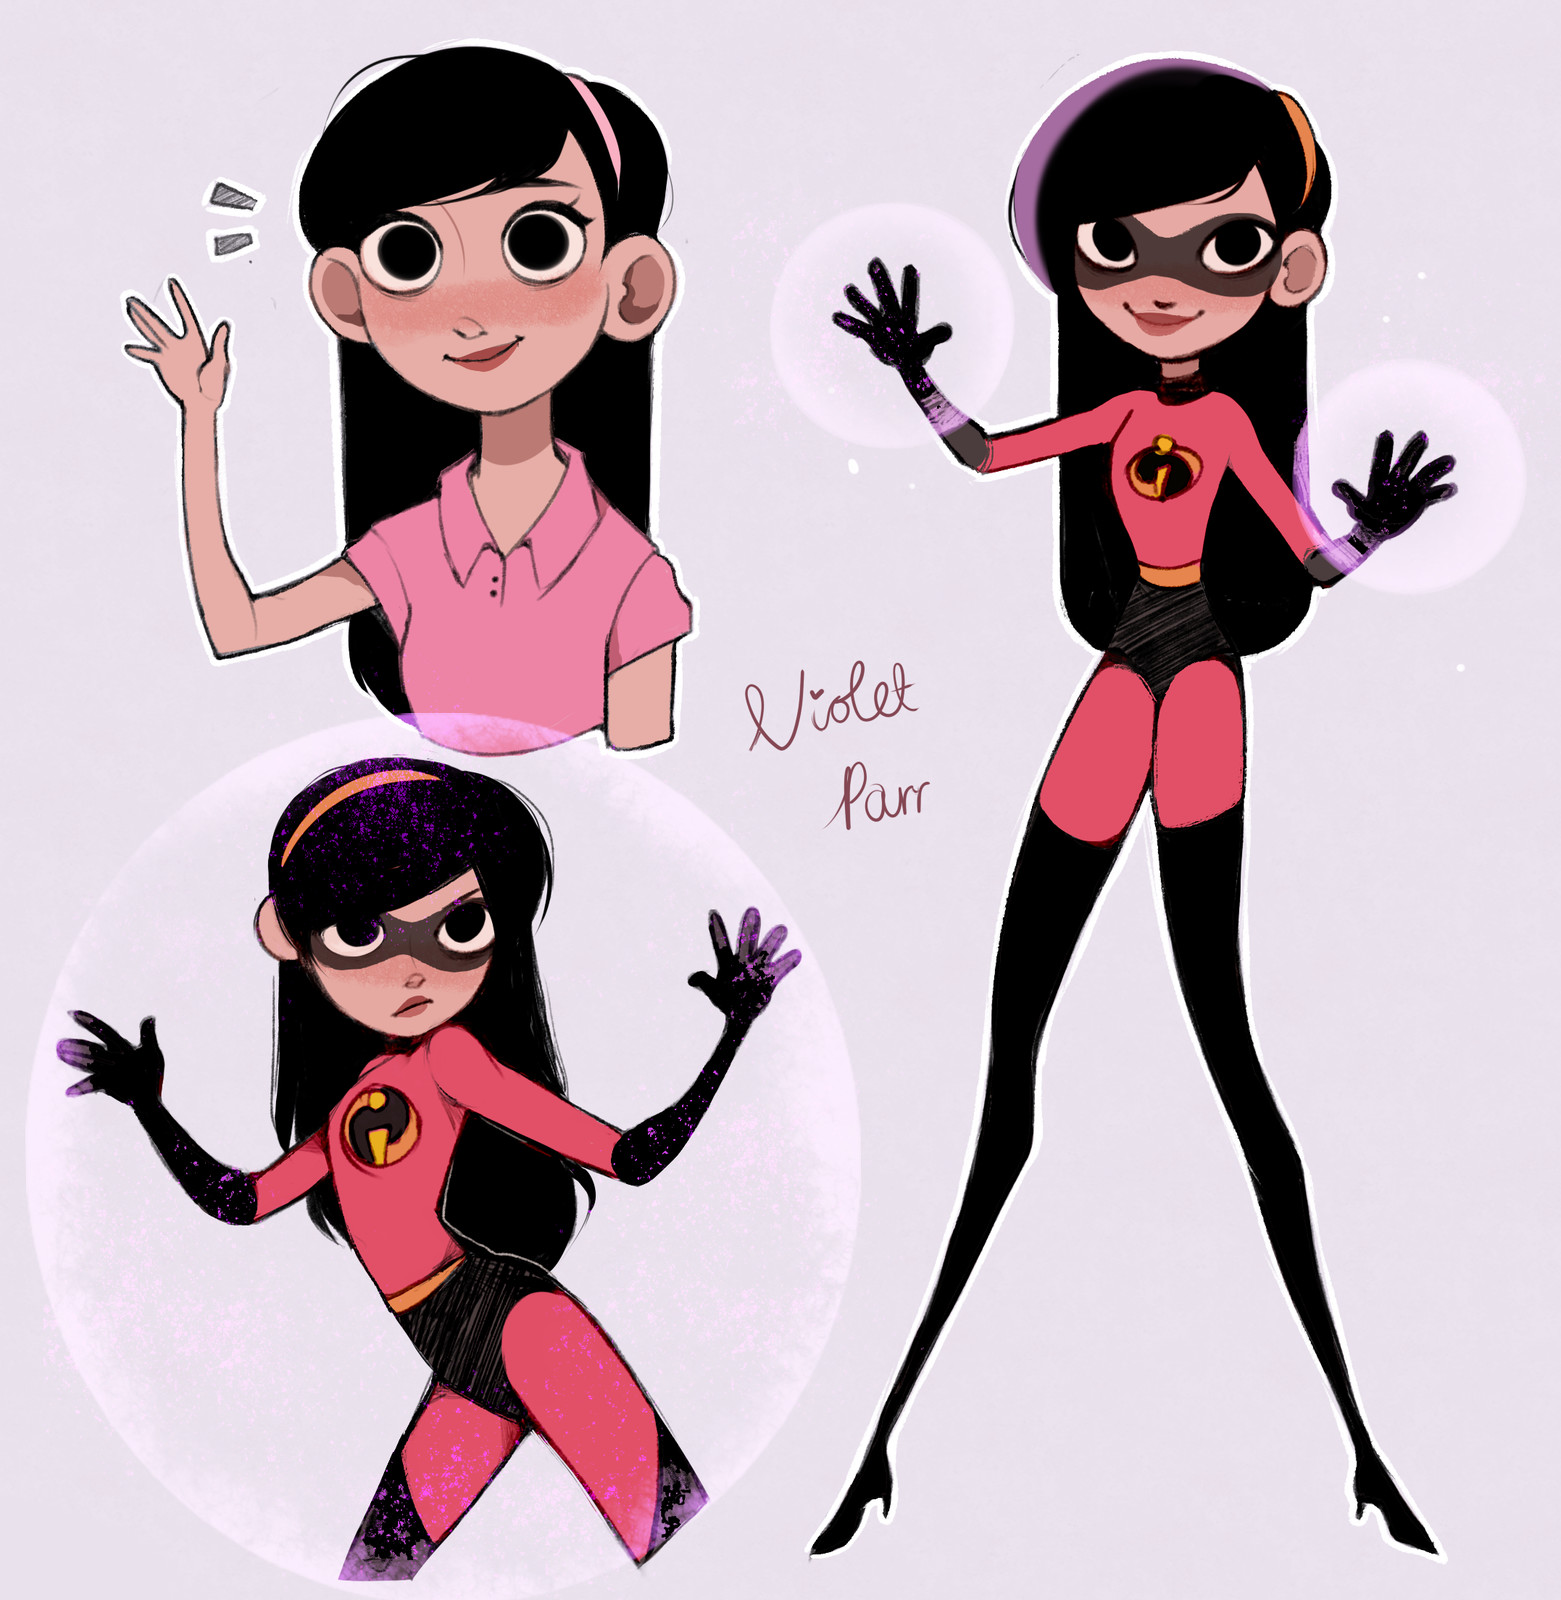 The incredibles helen violet